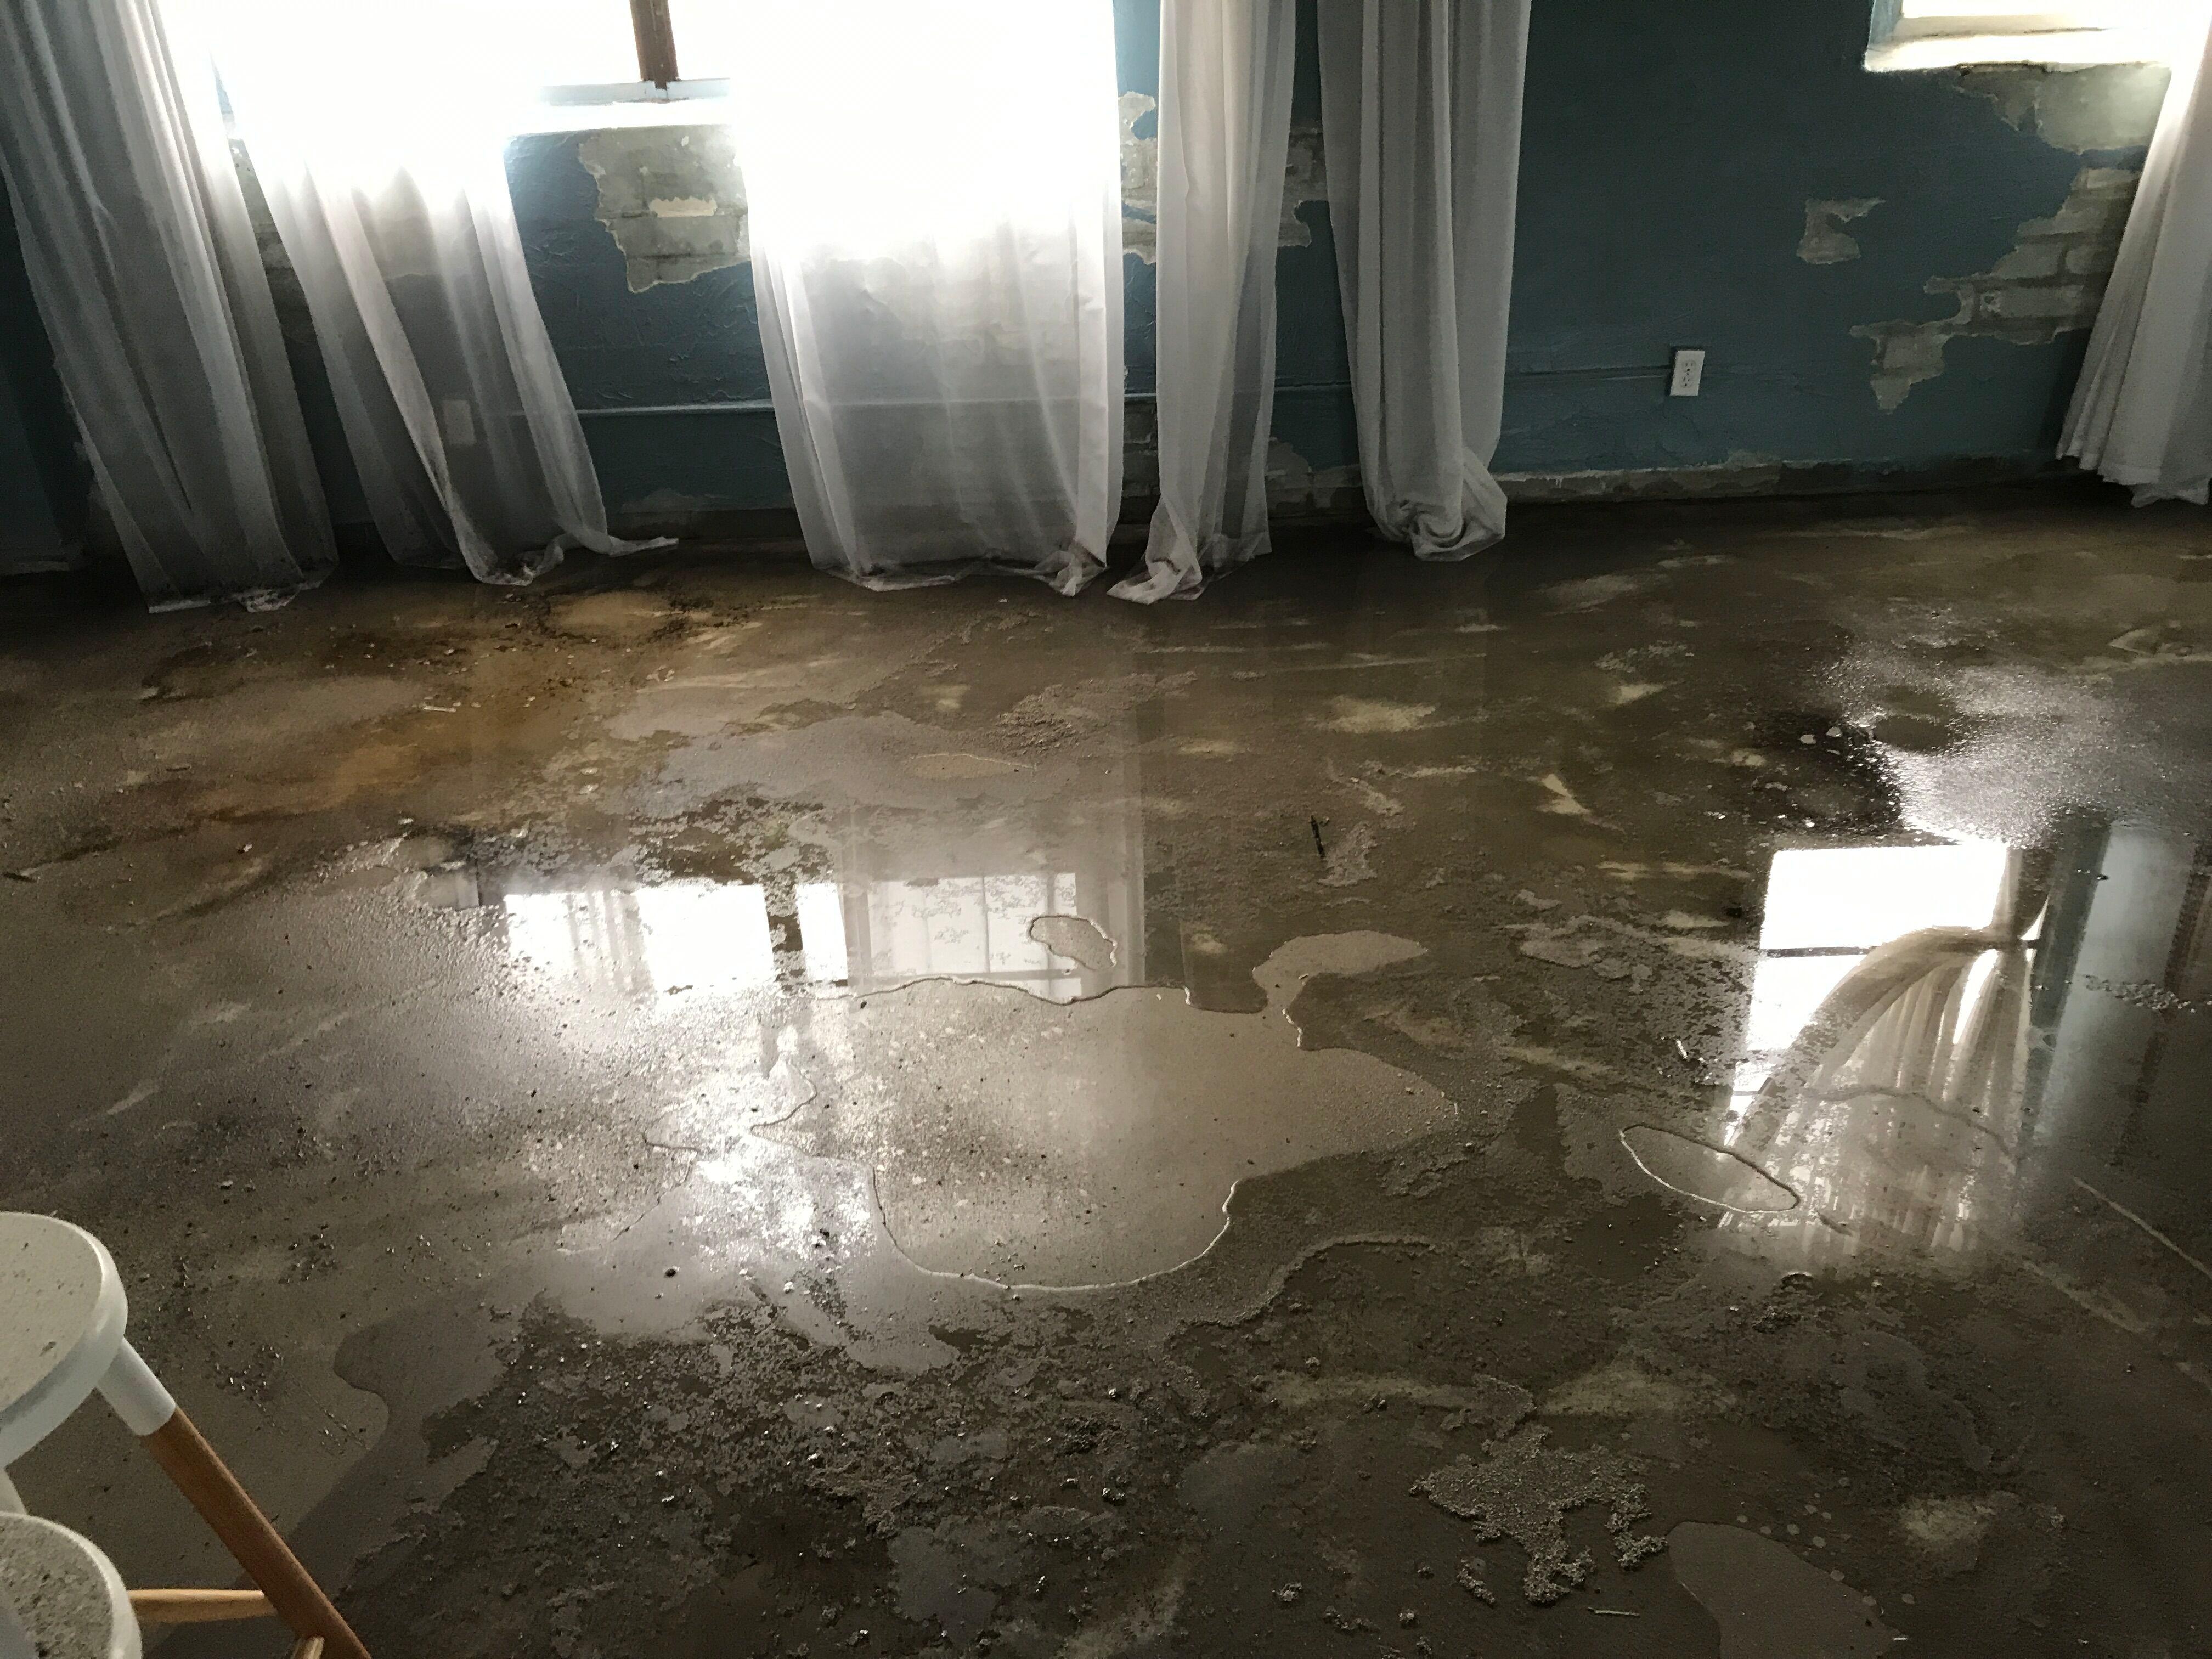 QCI Mold and Water Damage Naples (239)777-2875